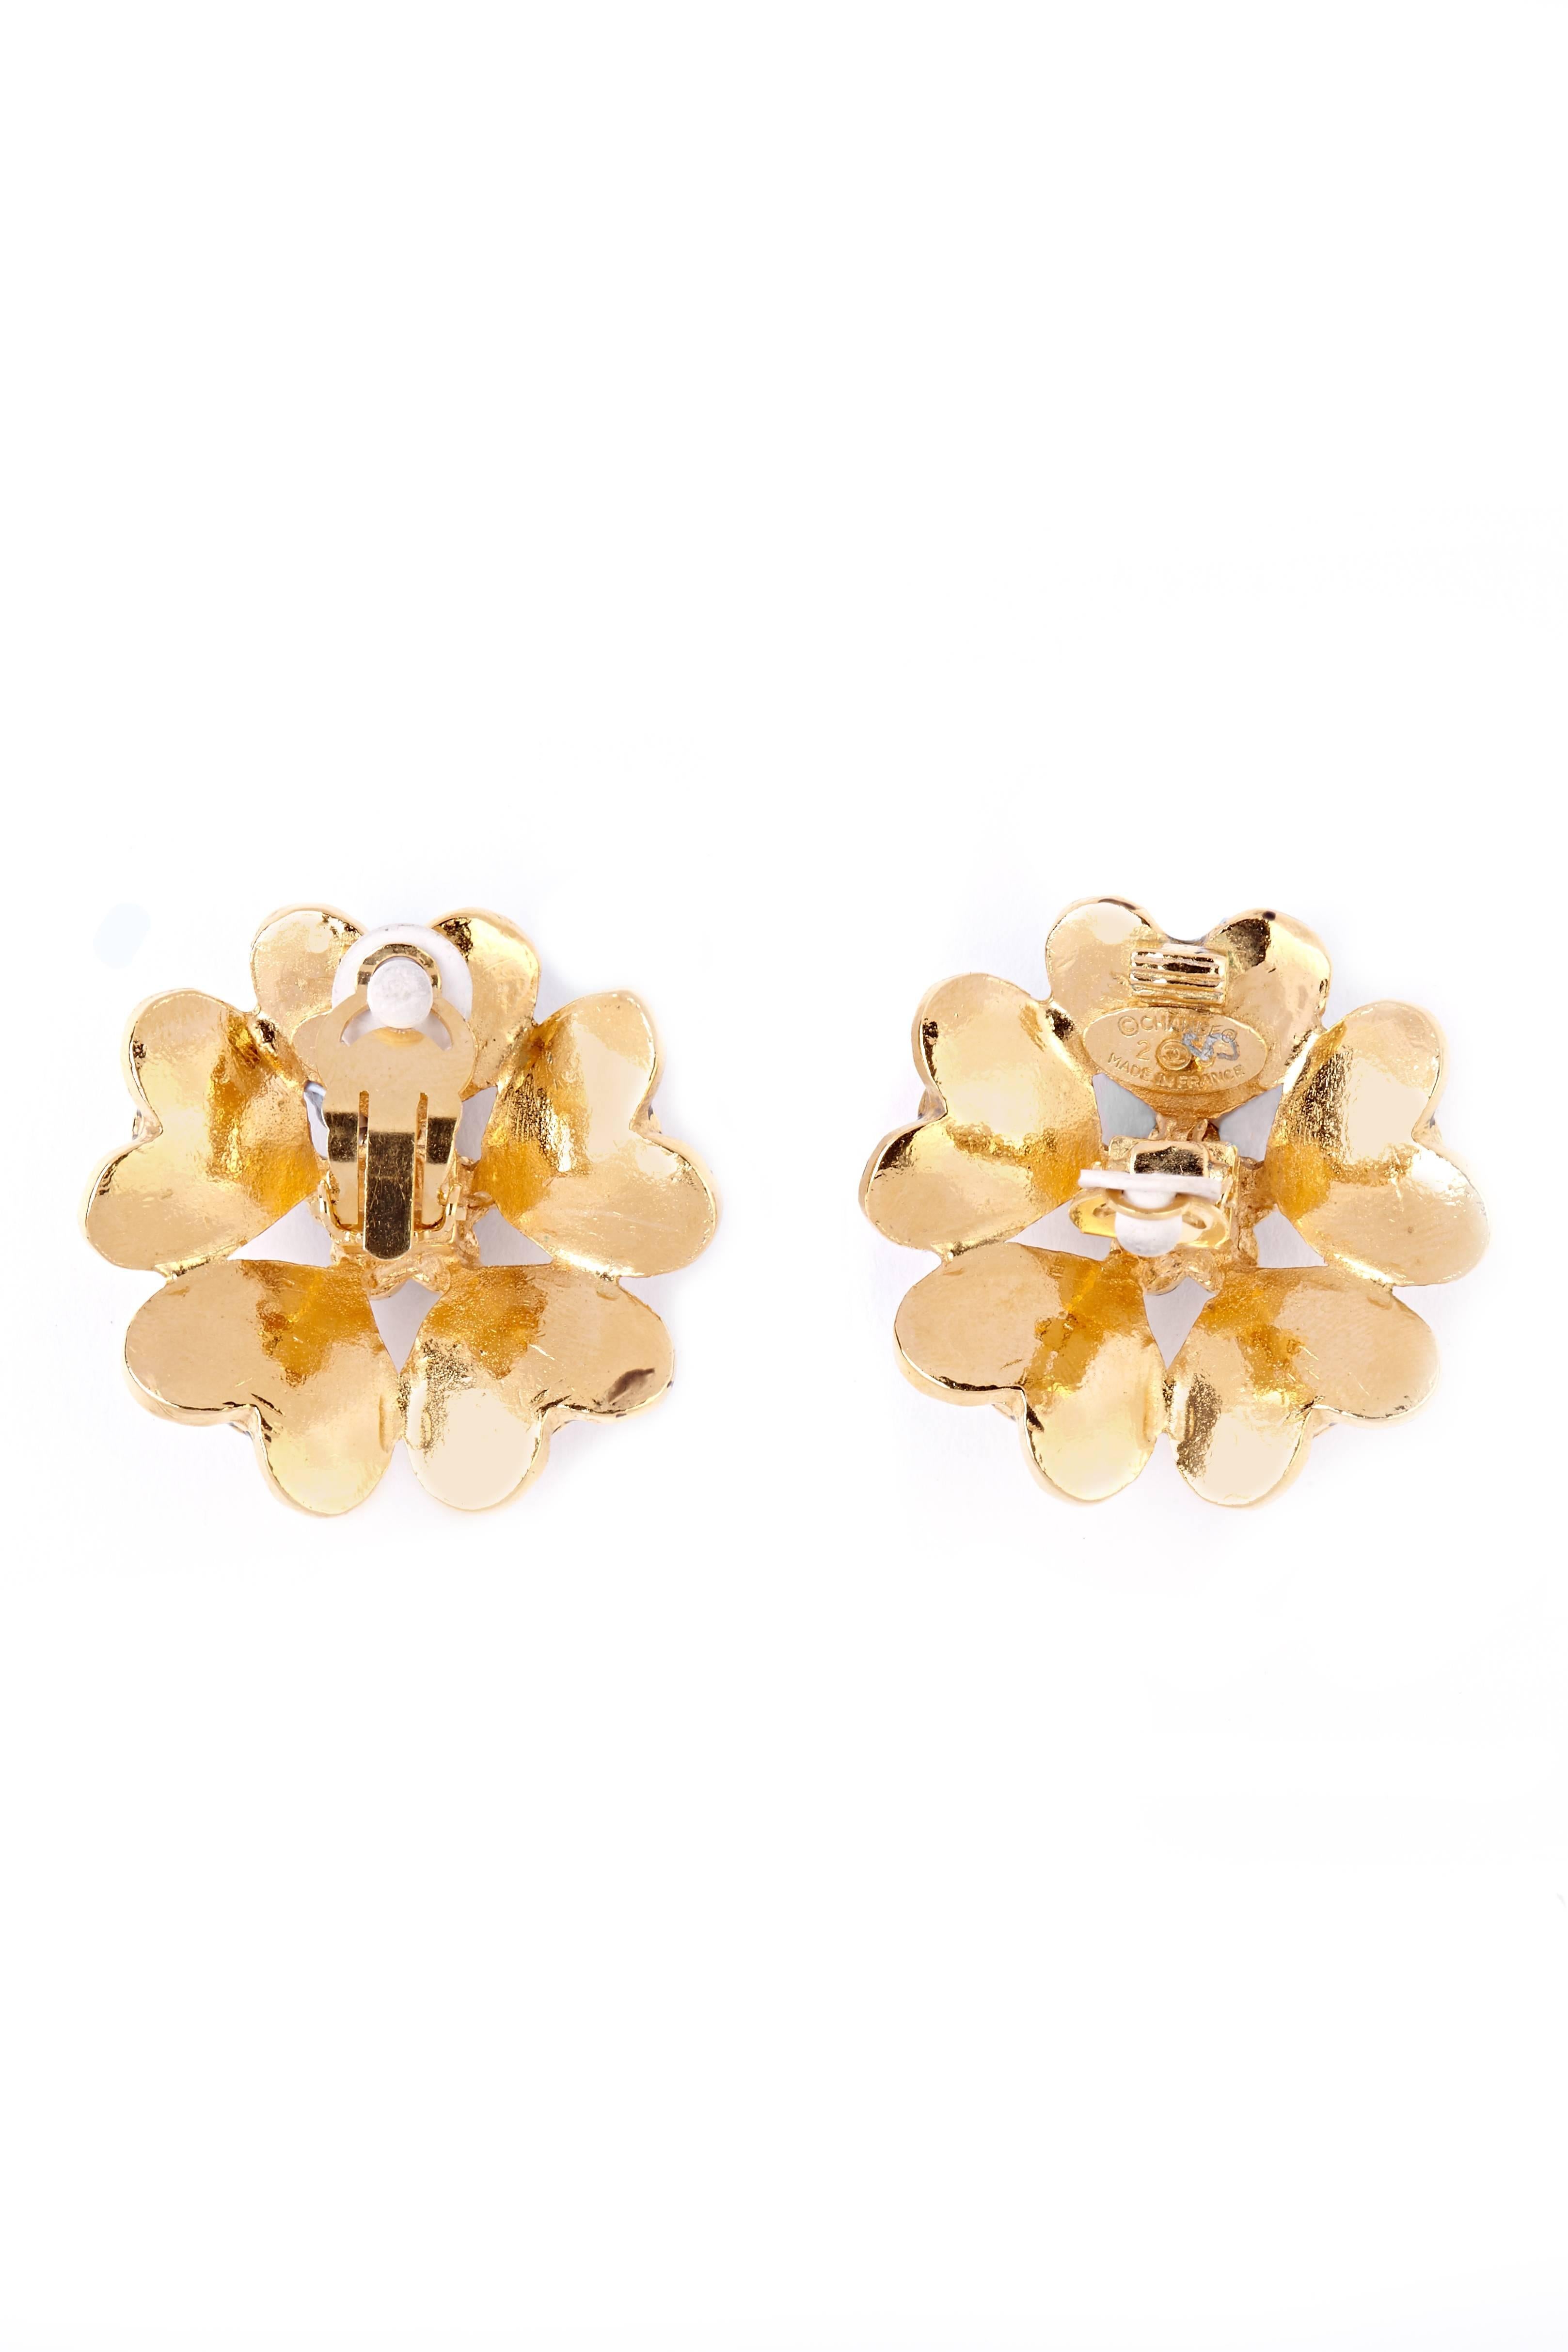 These wonderful statement Chanel 1980s earrings are a rare find and were issued before the design house had had their jewellery line officially trademarked. The design comprises of five gold metallic heart shaped petals arranged around a faux pearl